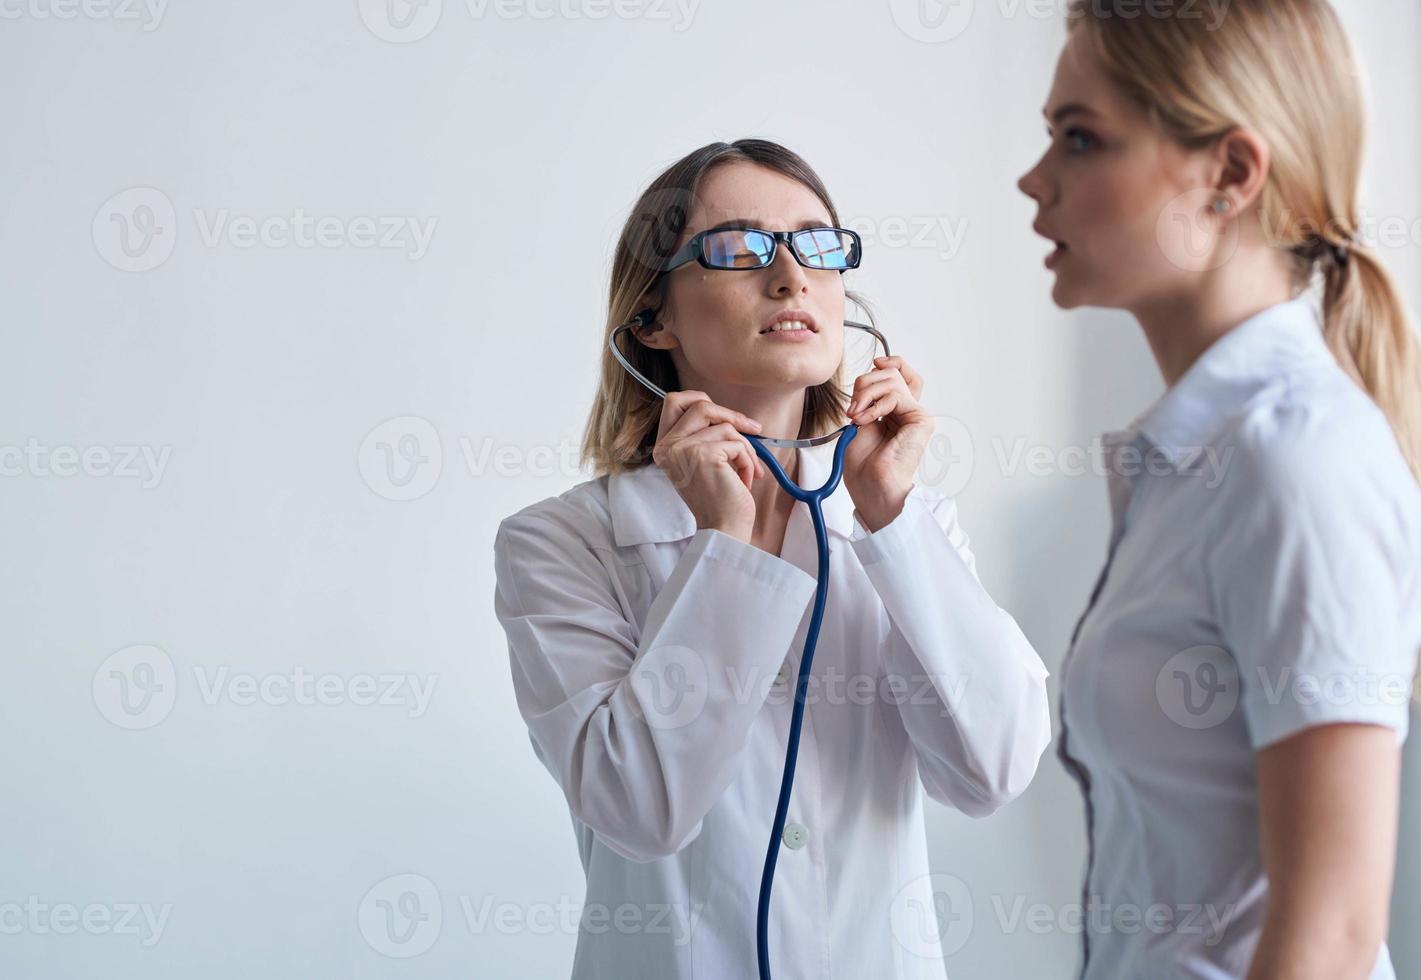 woman doctor in a medical gown and glasses with a stethoscope around her neck and a female patient photo